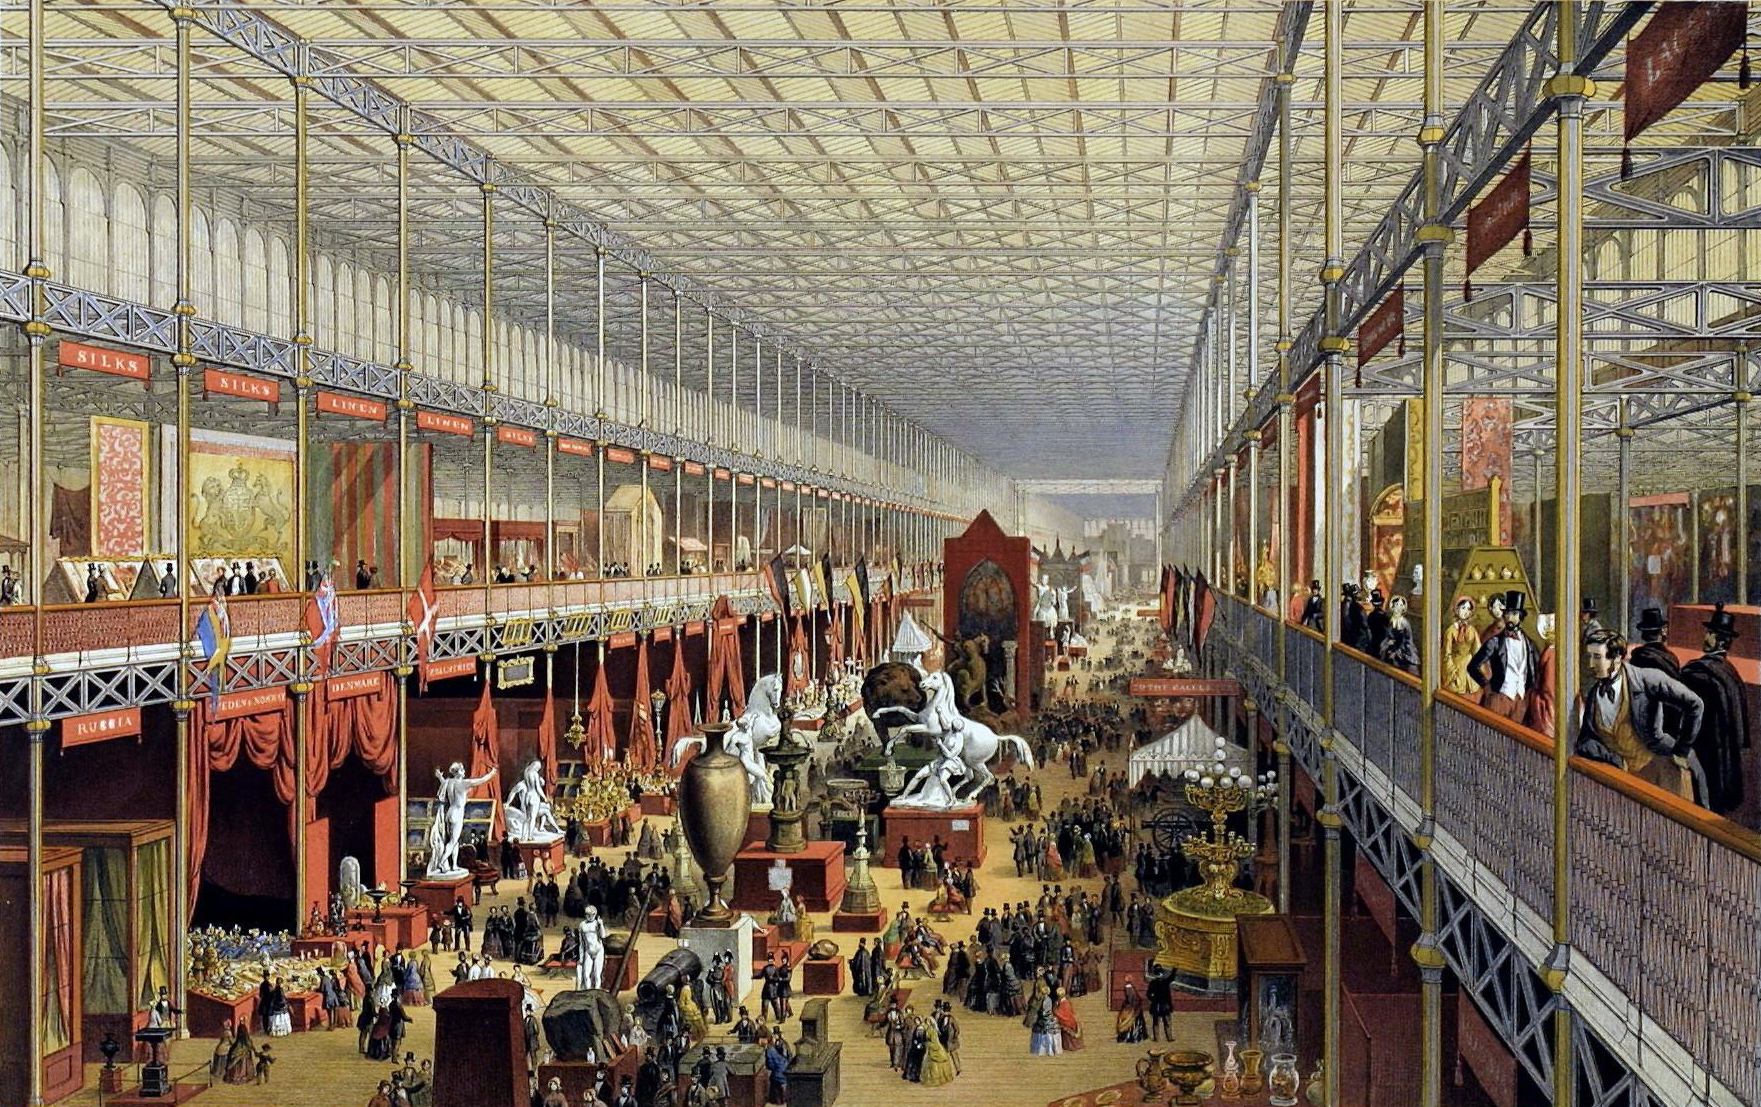 The Great Exhibition in London,The United Kingdom,was the first country in the world to industrialise.